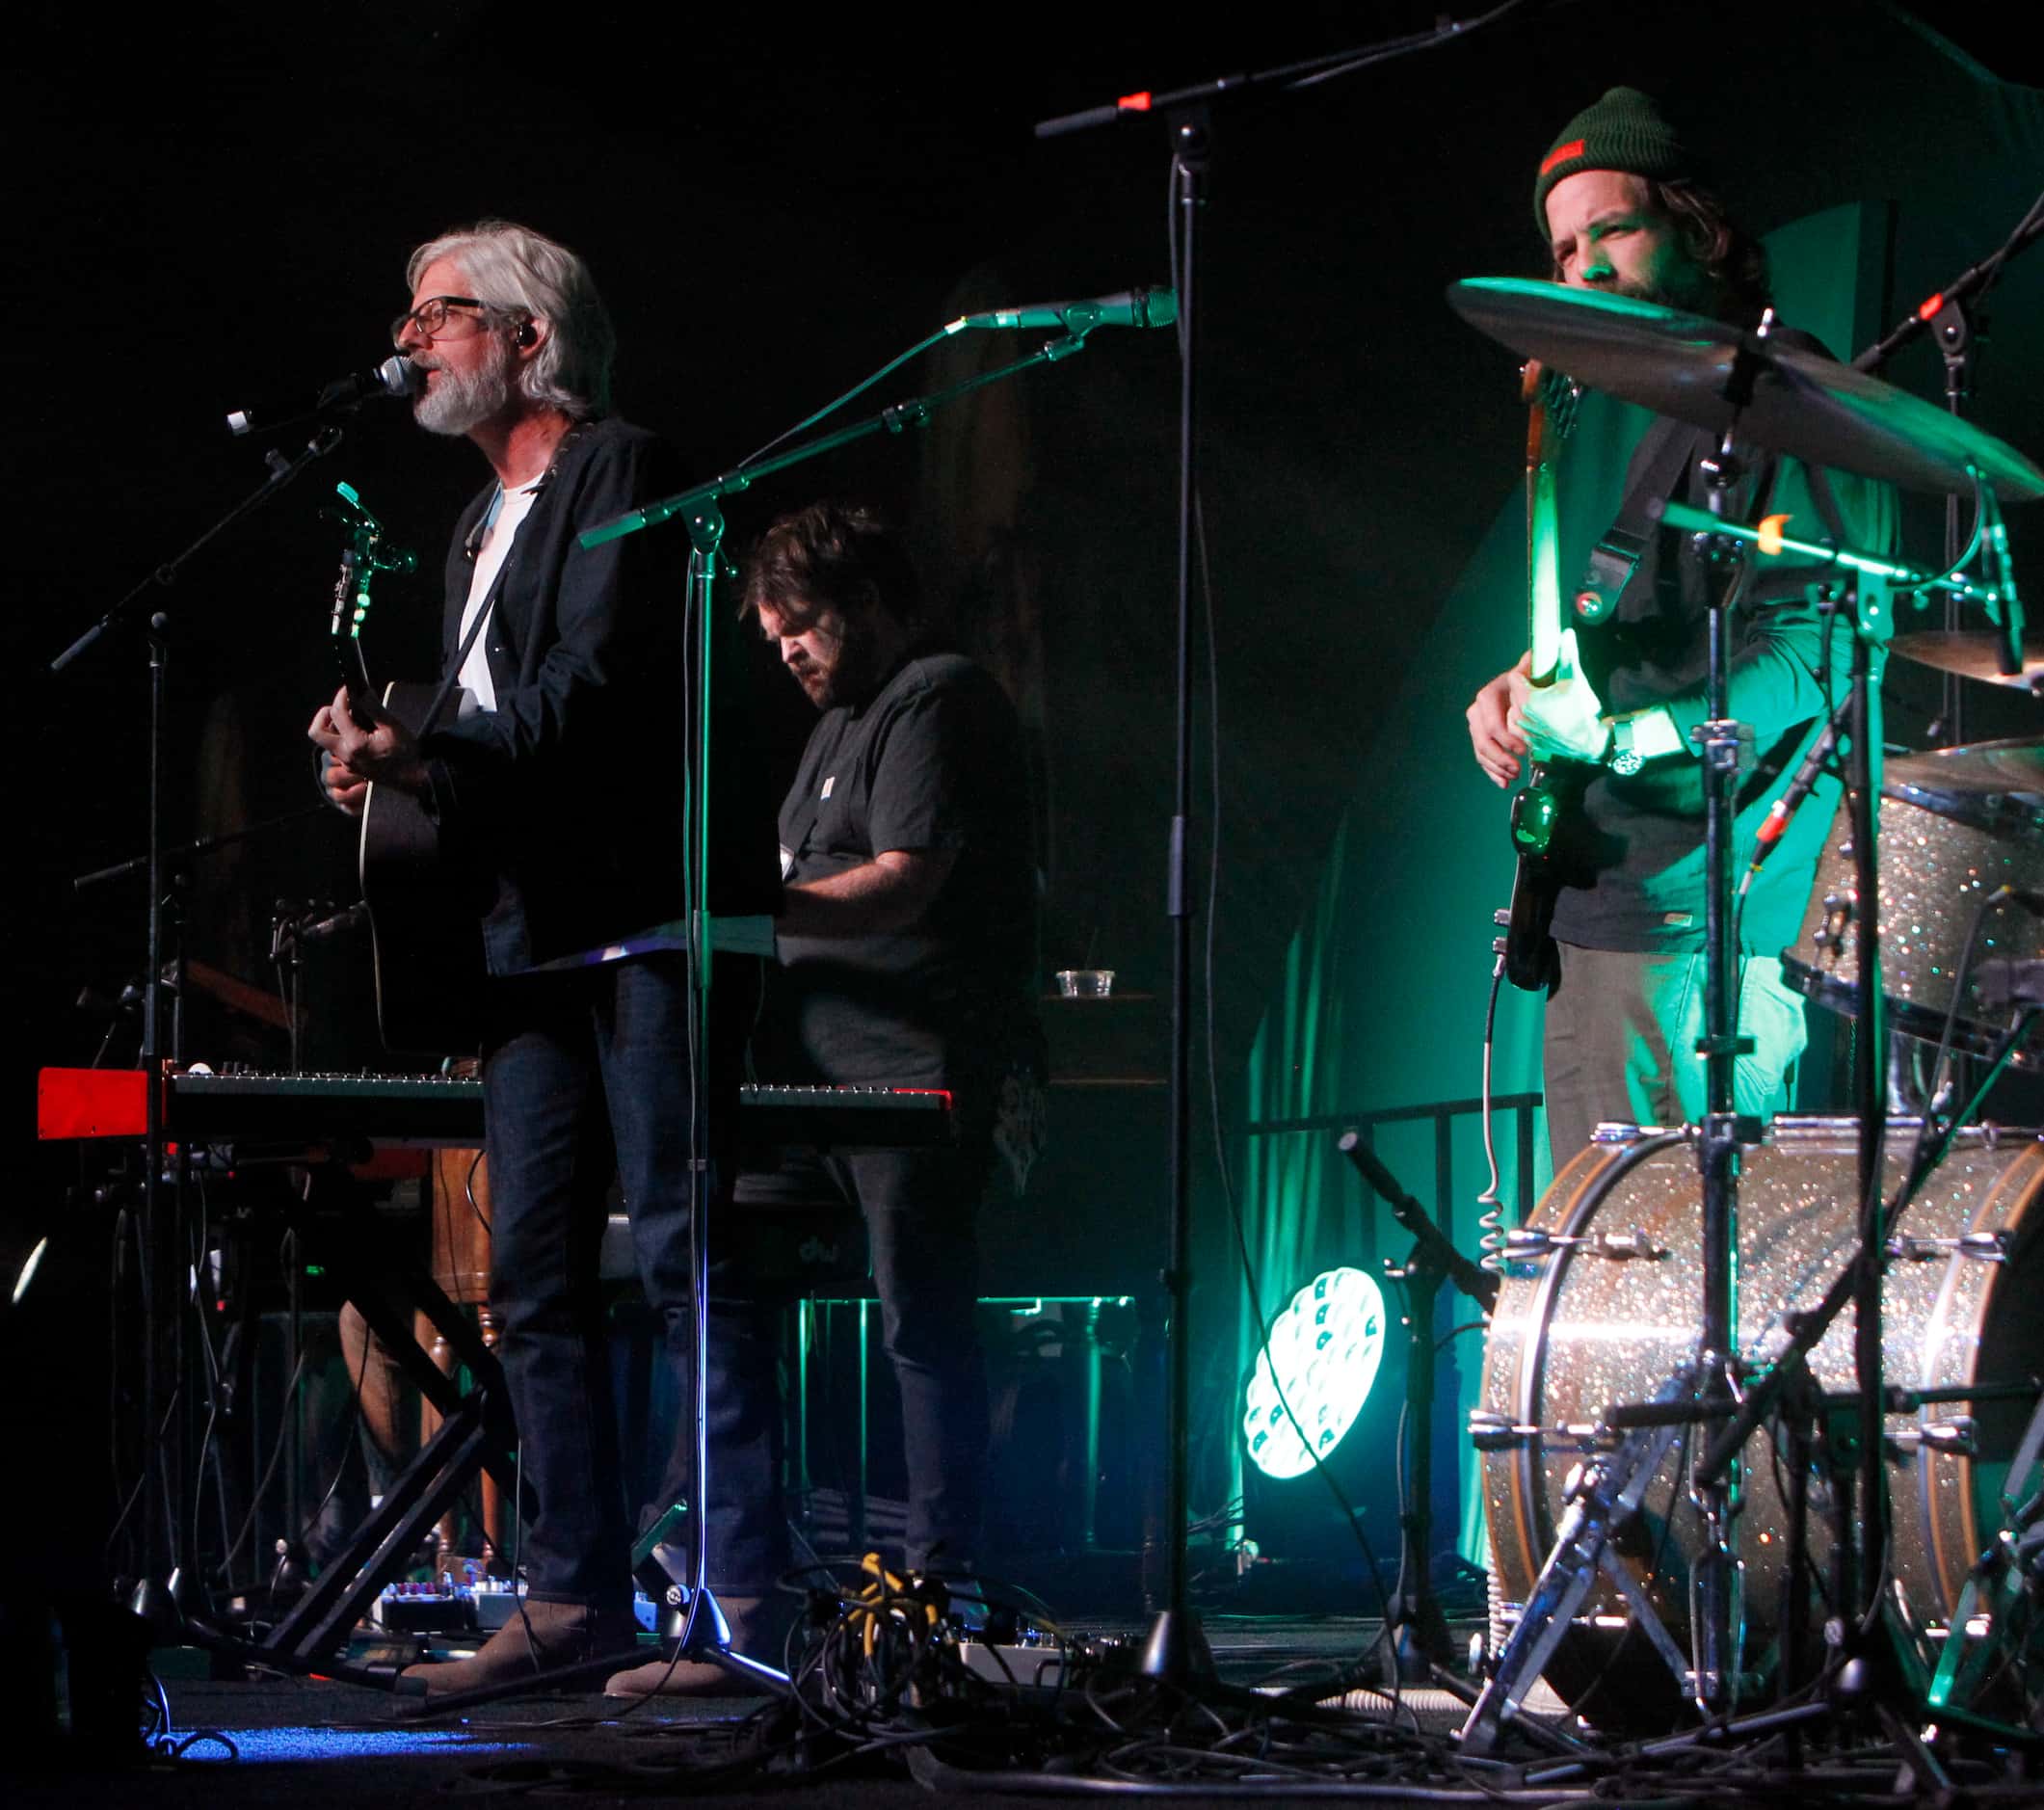 Christian musician Matt Maher and his band perform a concert before a large ChosenCon crowd...